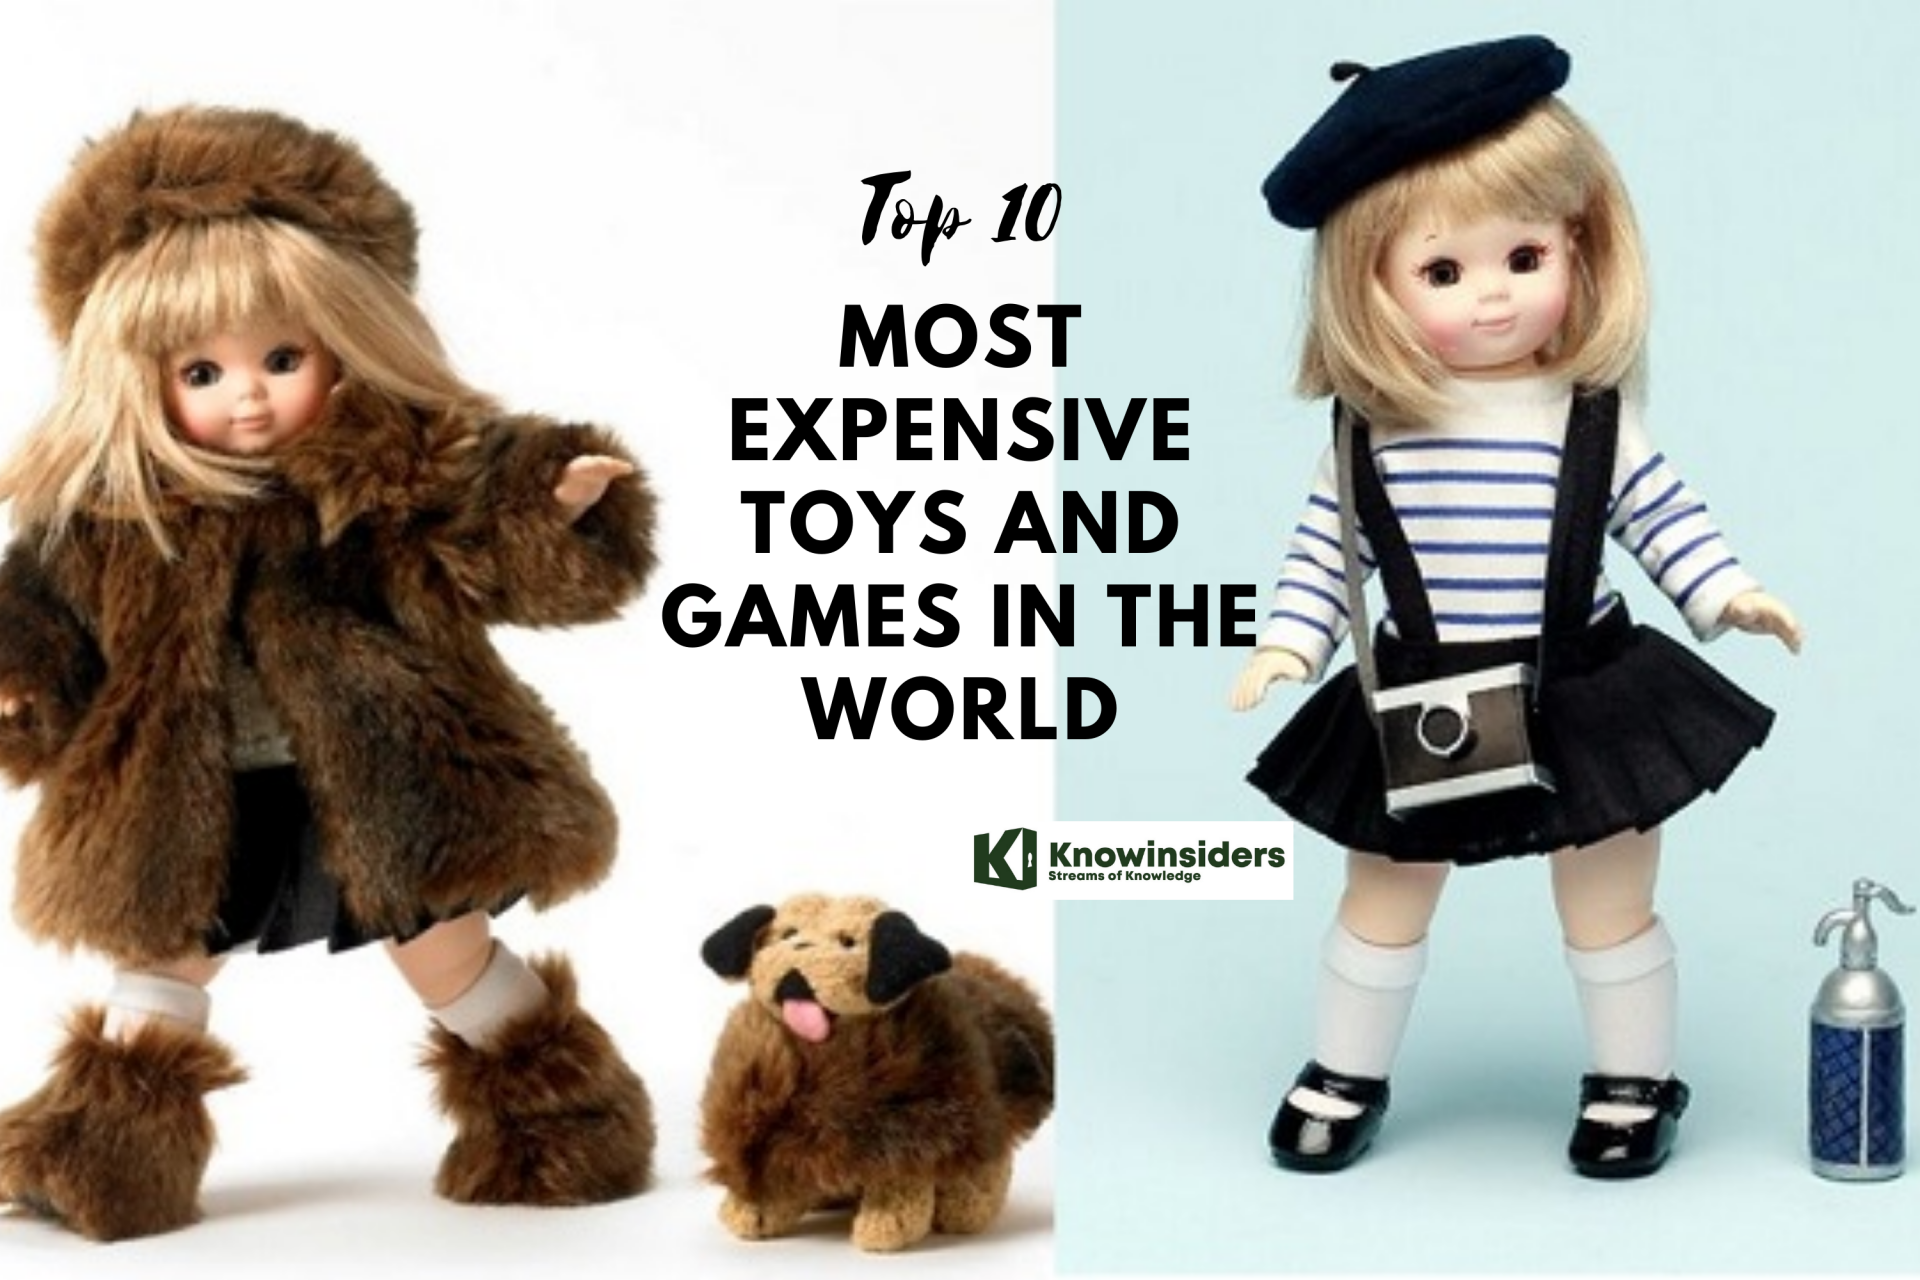 Top 10 Most Expensive Toys and Games in the World